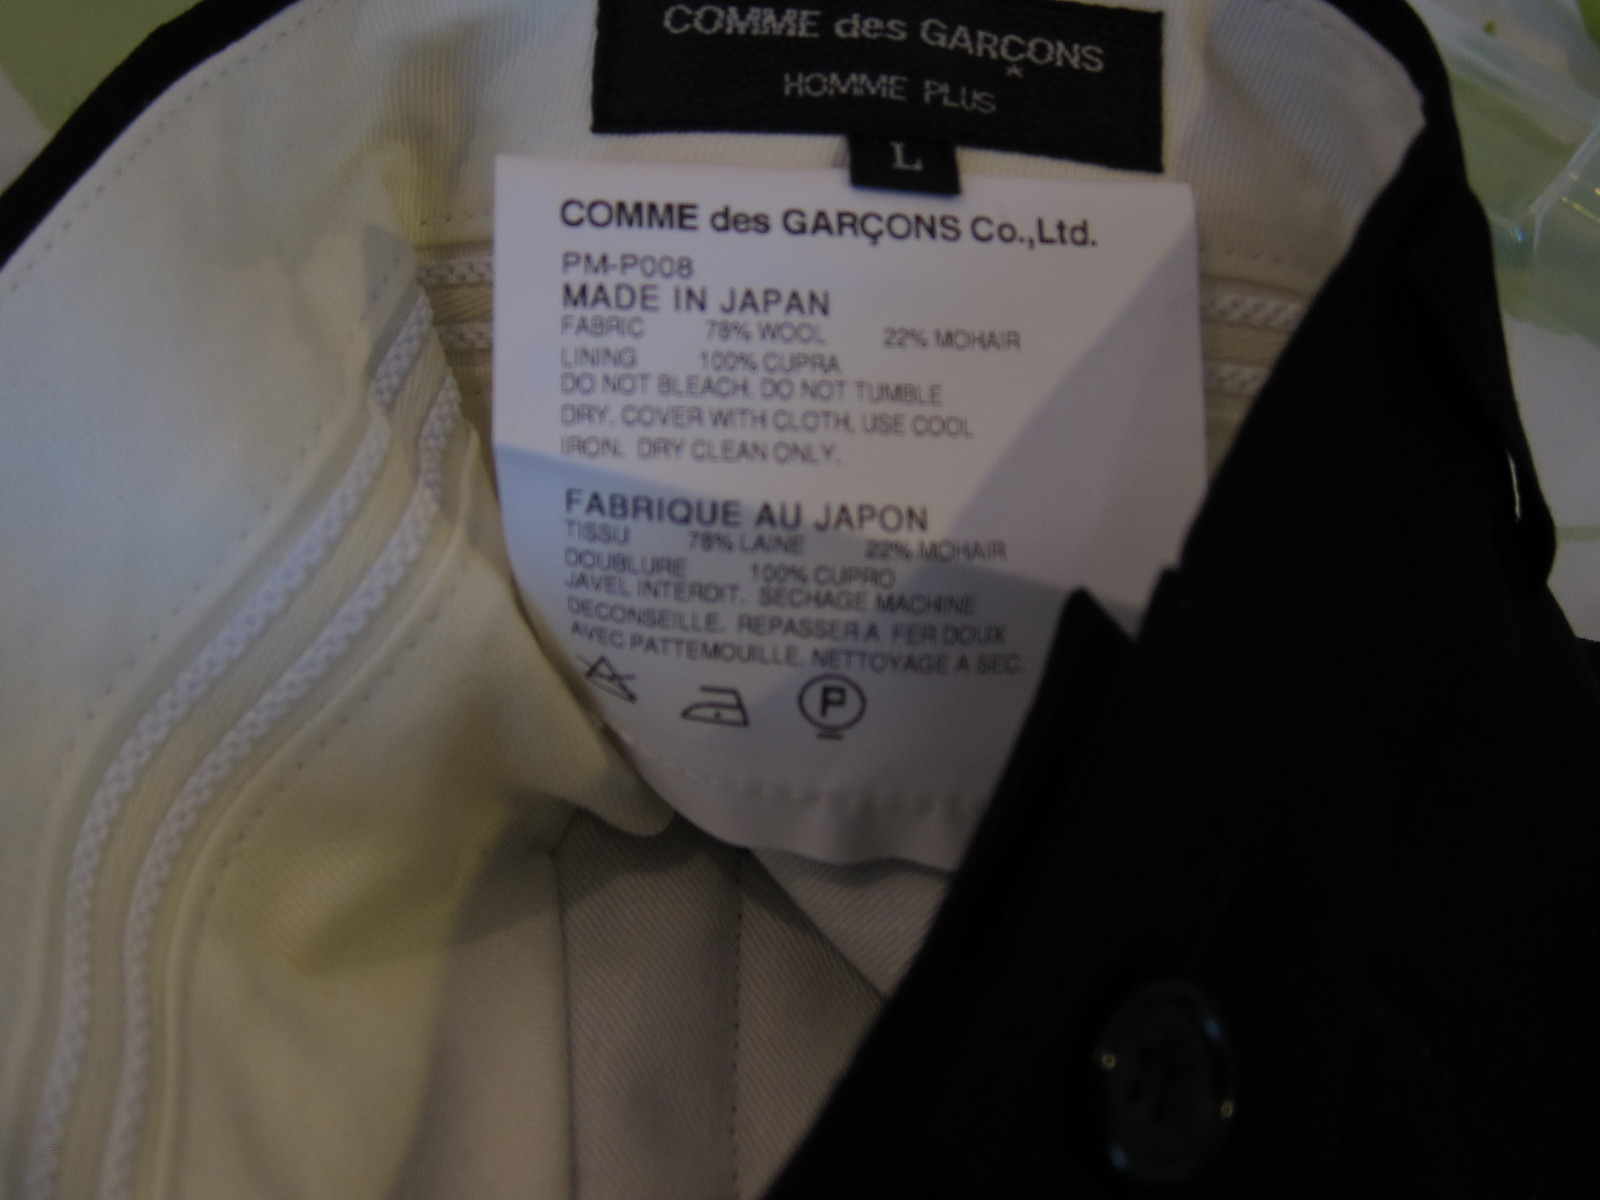 Comme des Garcons Homme Plus S/S14 double-layer blazer and trousers